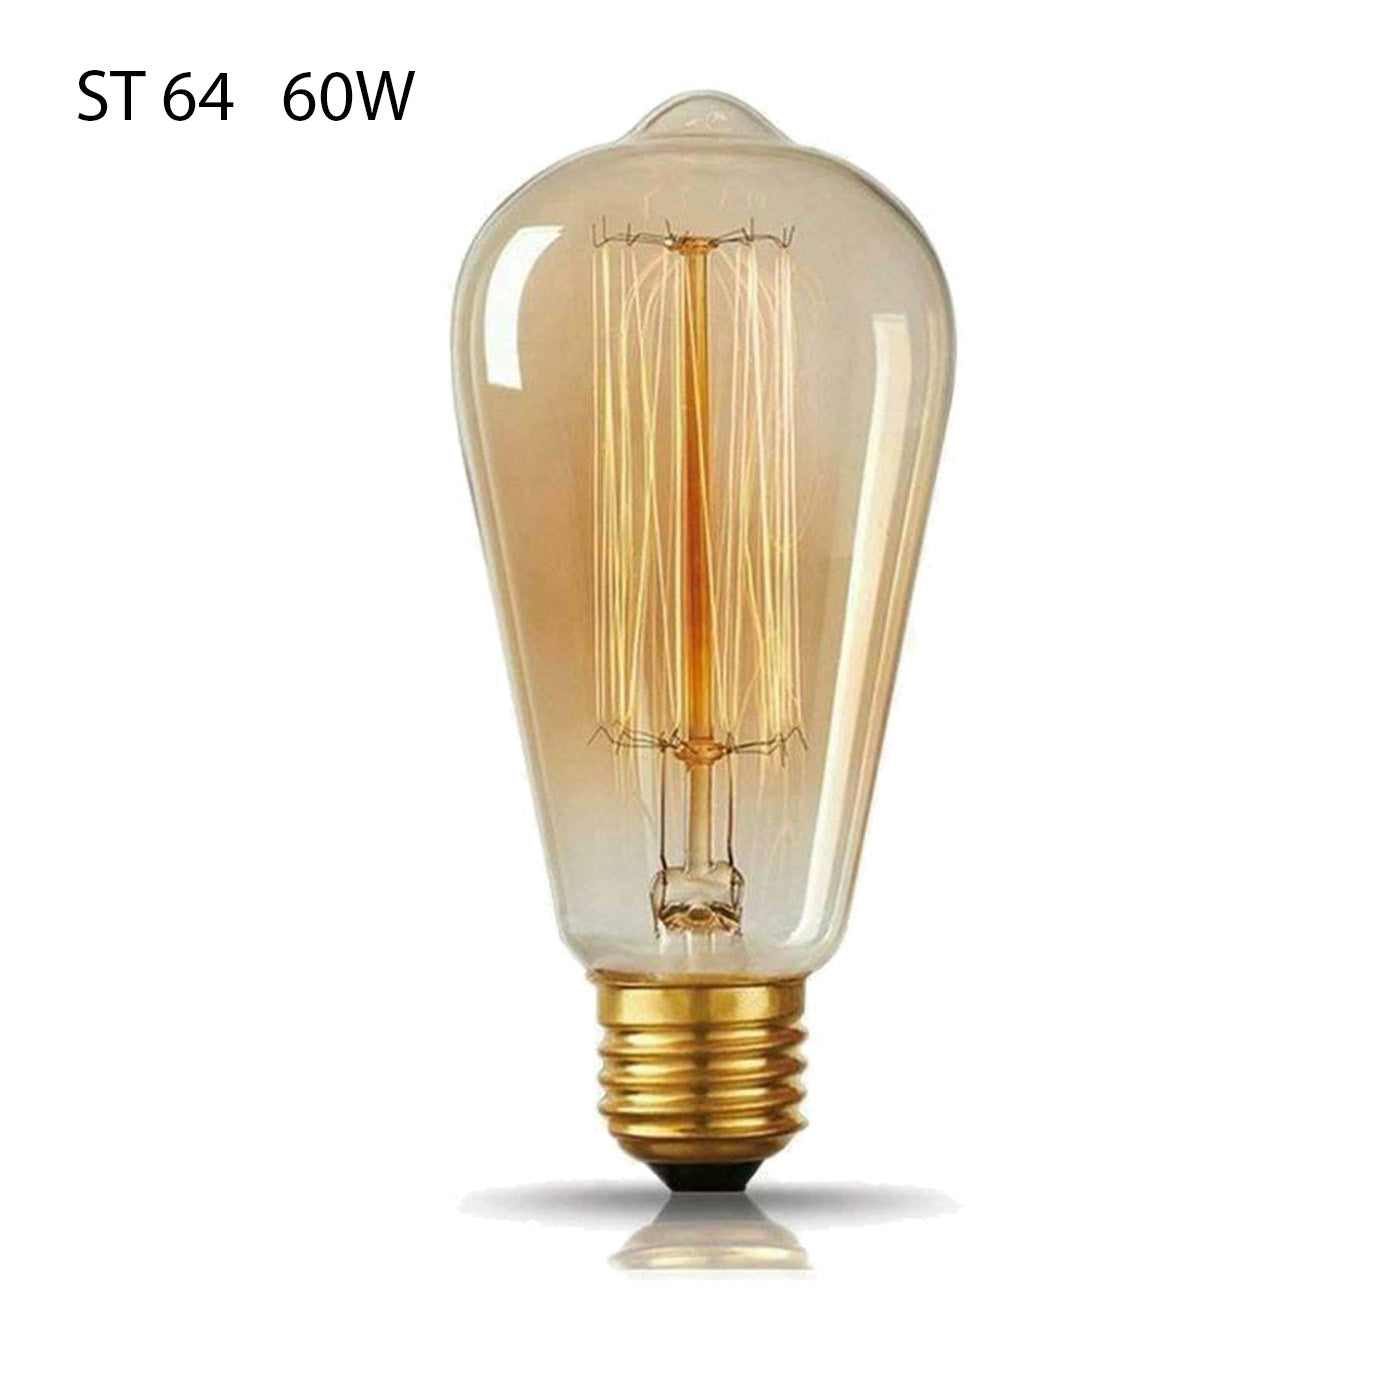 ST64 E27 60W Dimmable Squirrel Industrial Filament Vintage Bulb